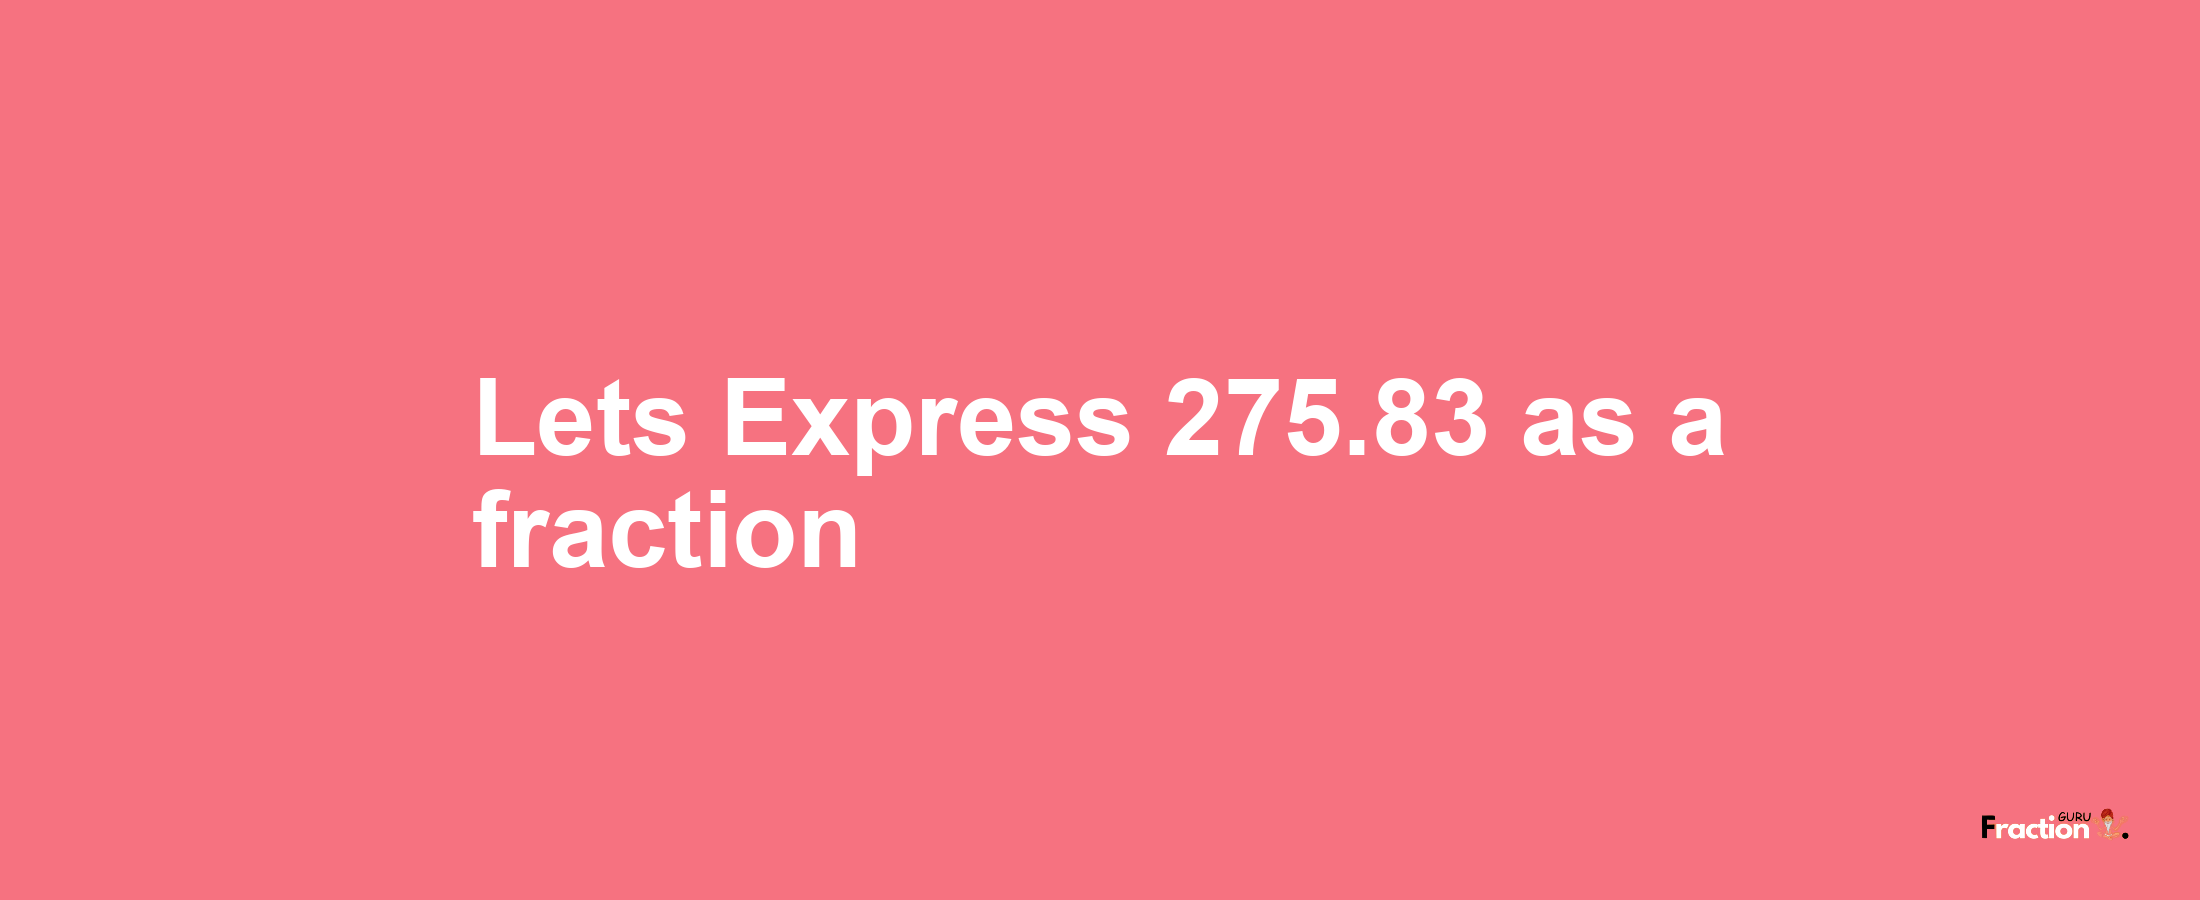 Lets Express 275.83 as afraction